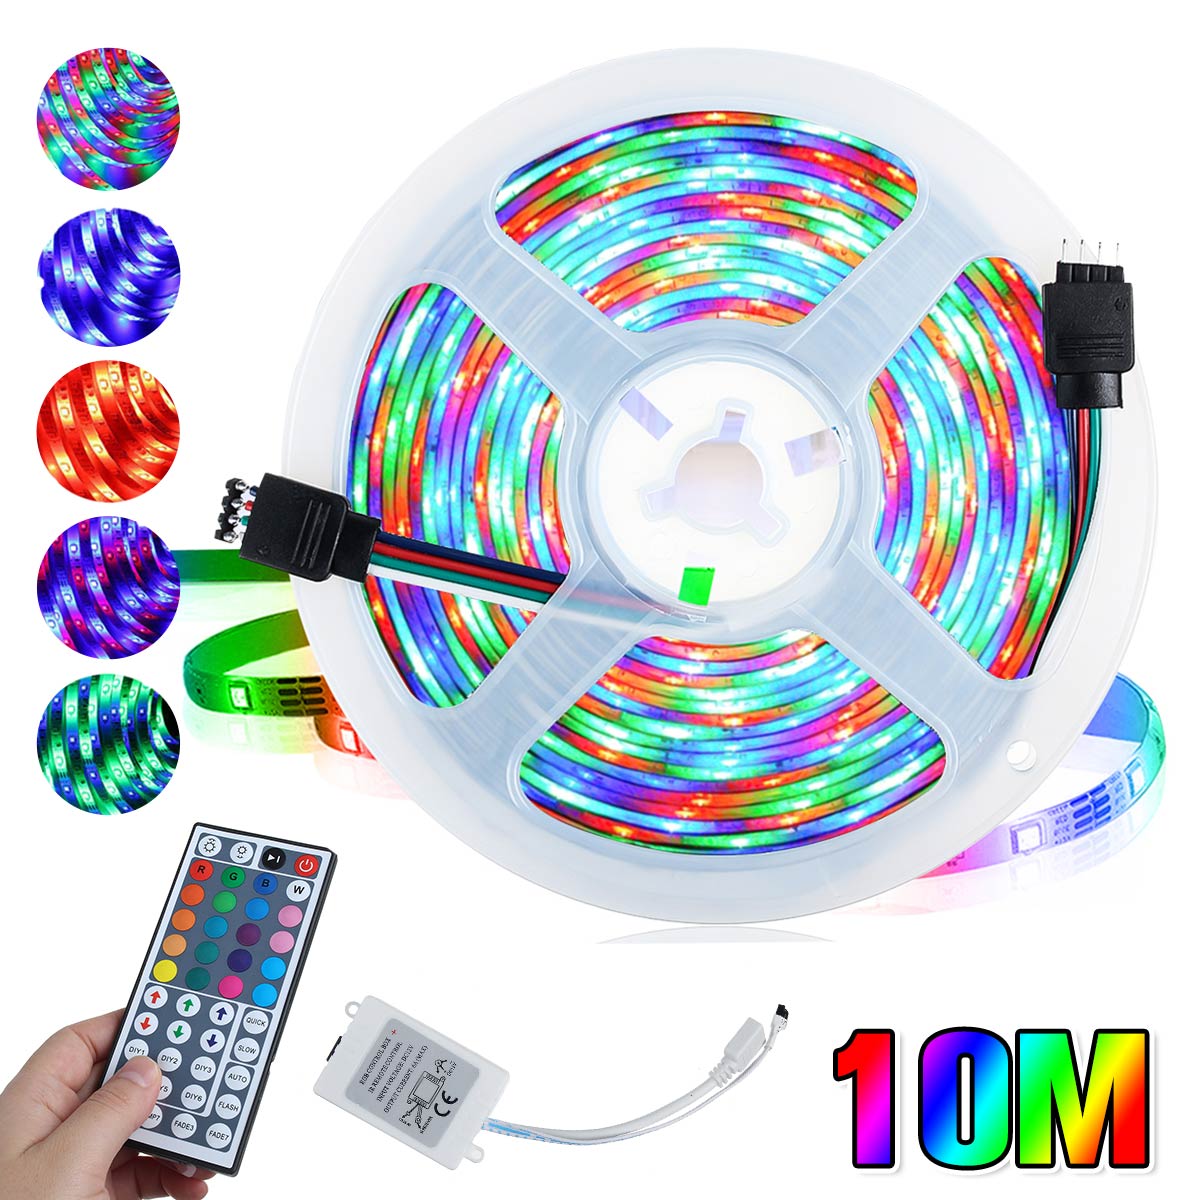 DC12V-3X5M10M-LED-Strip-Light-Non-waterproof-3528-RGB-Tape-Lamp-for-Room-TV-Party-Bar--Remote-Contro-1729474-2